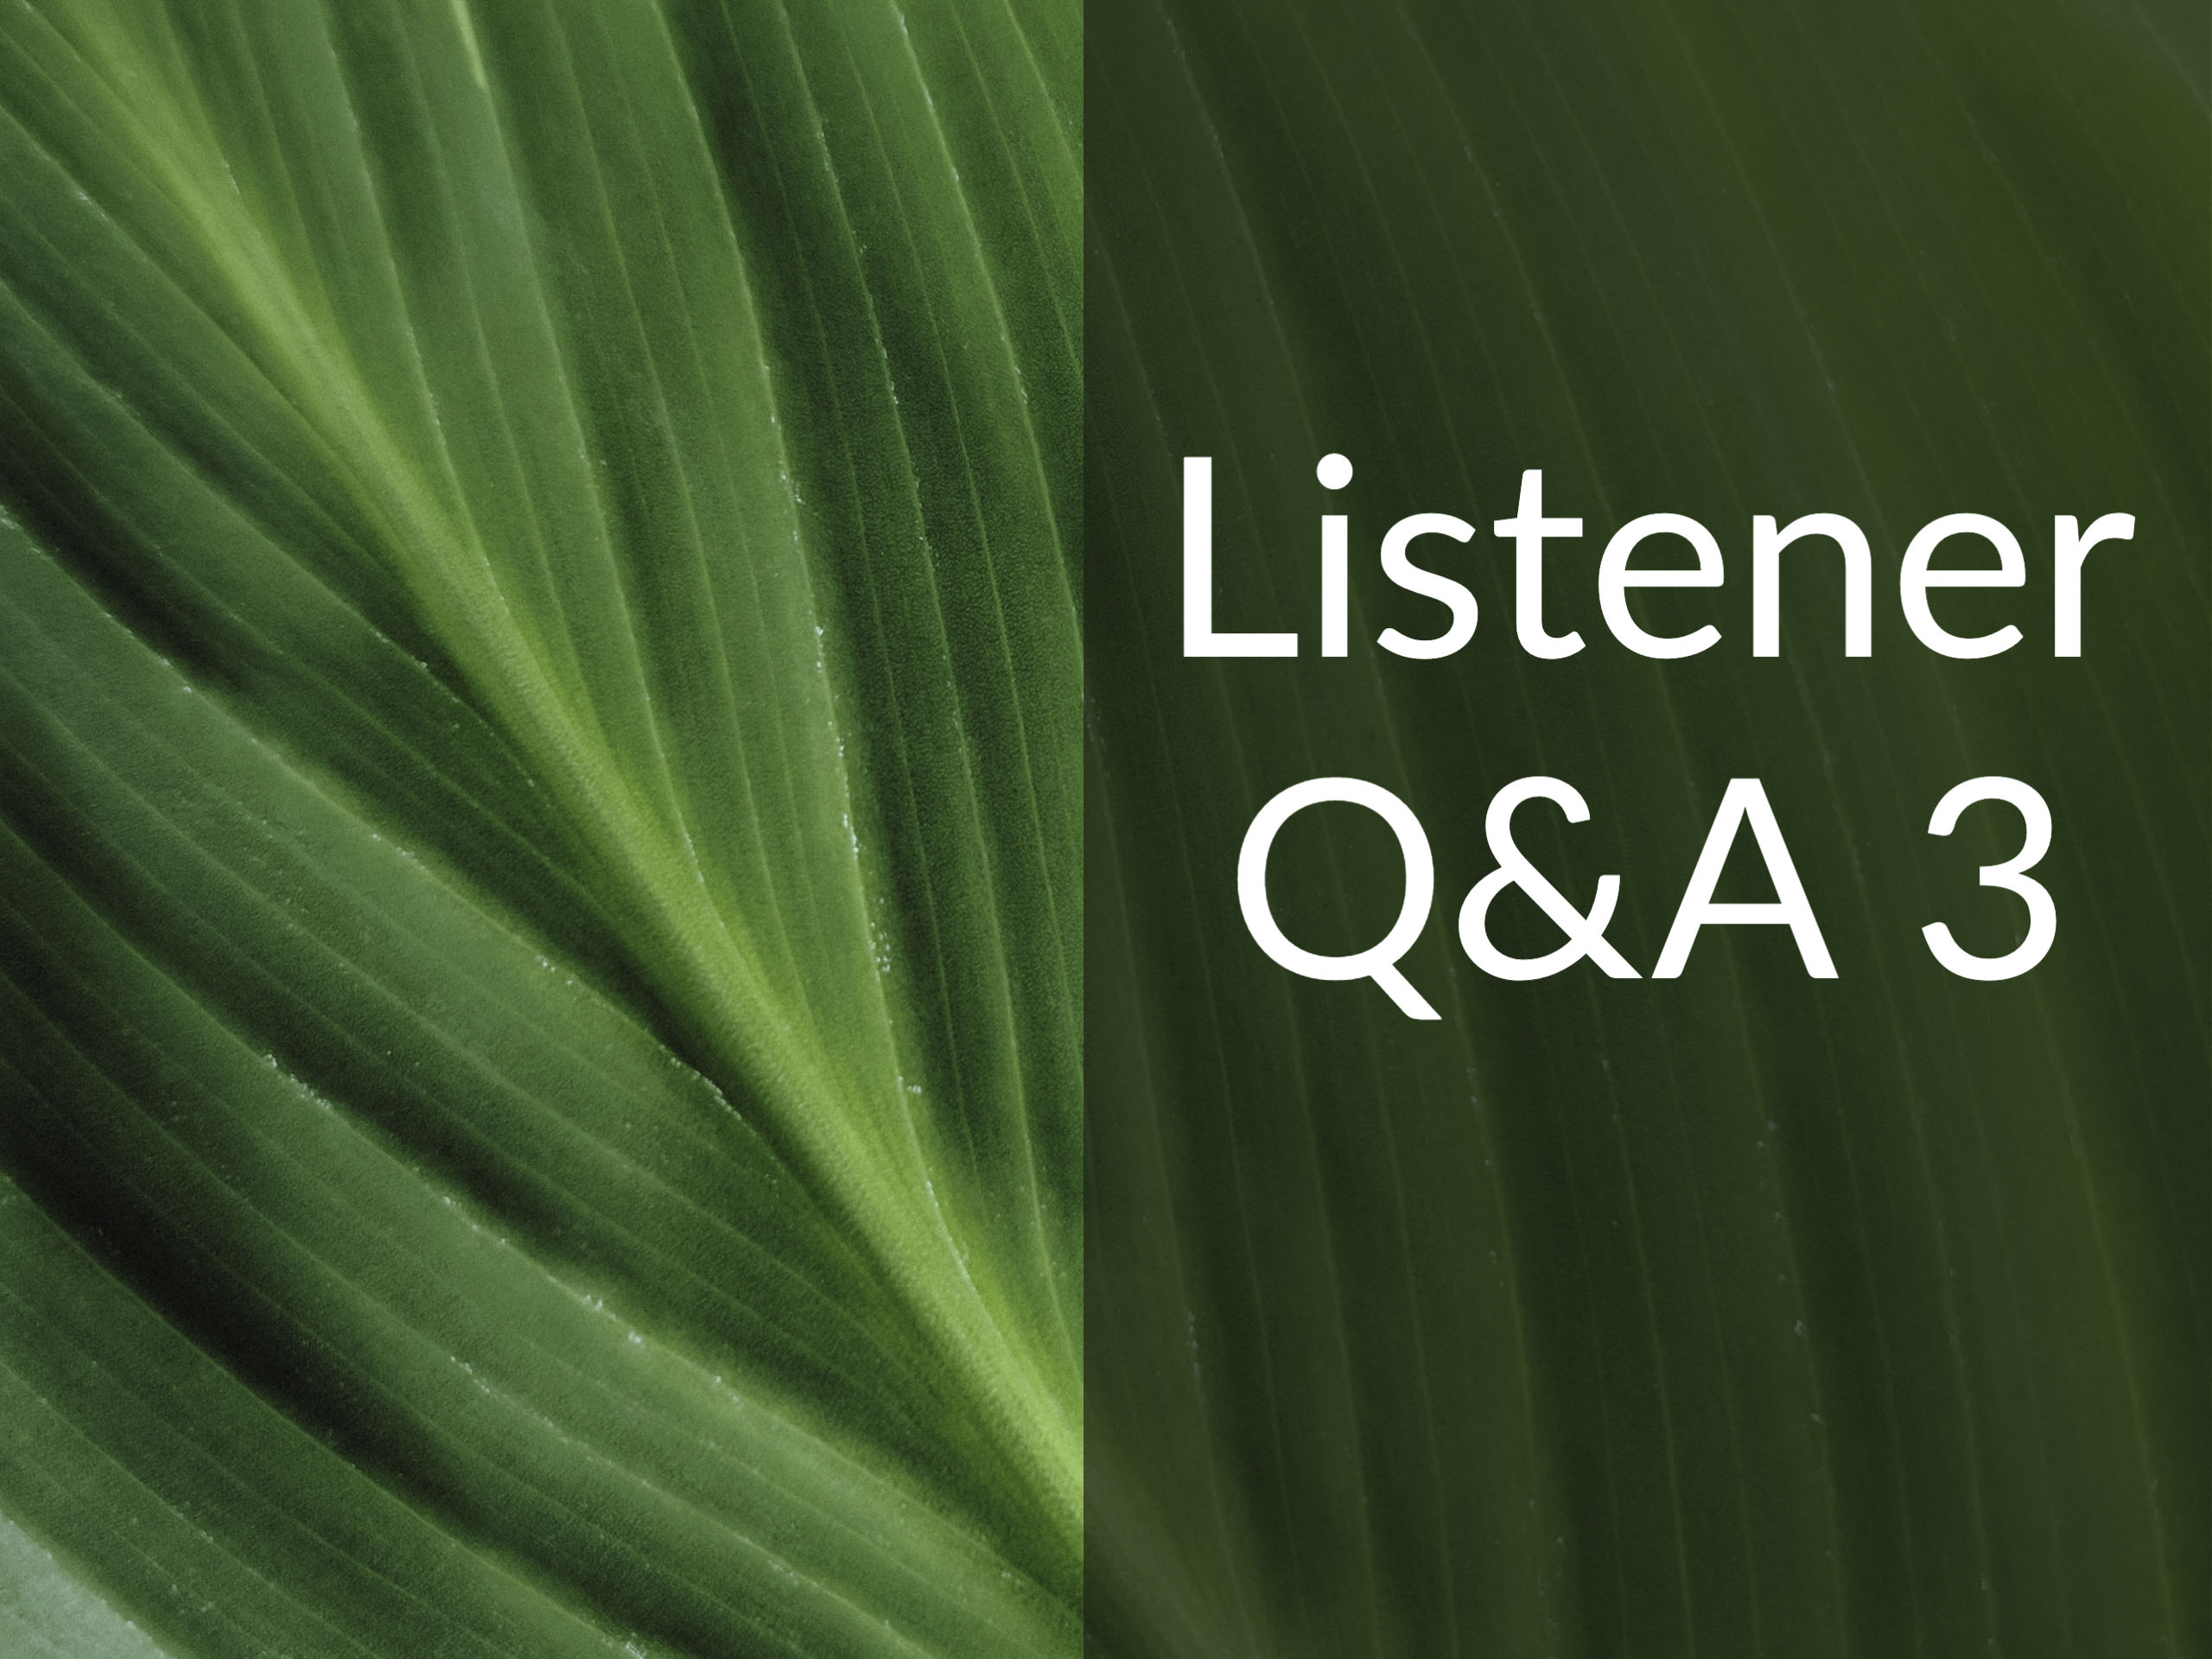 Green leaf with the caption "Listener Q&A 3"